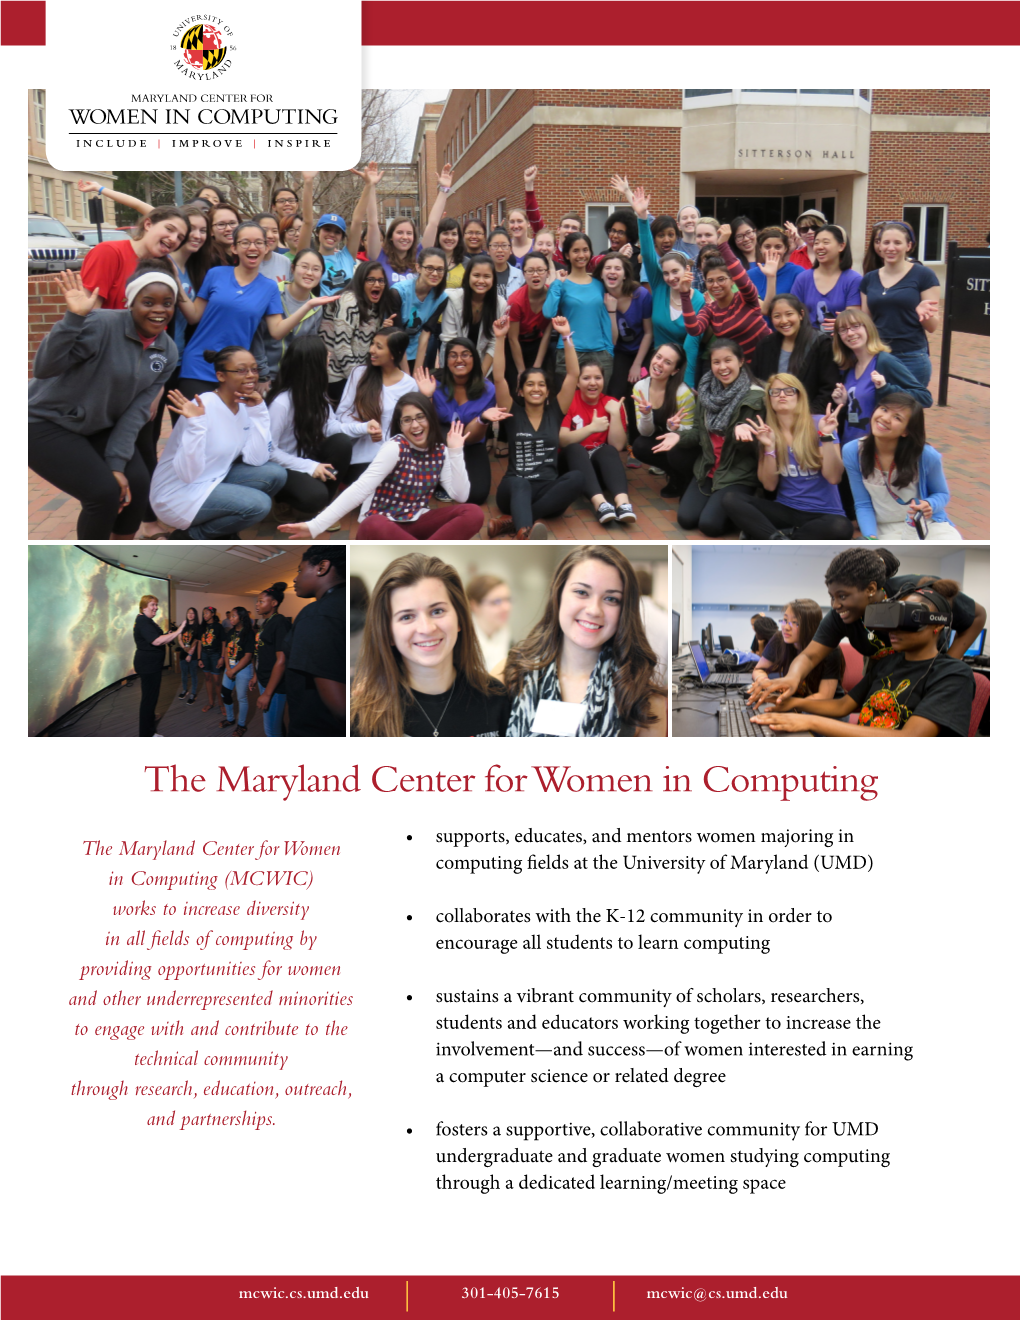 The Maryland Center for Women in Computing